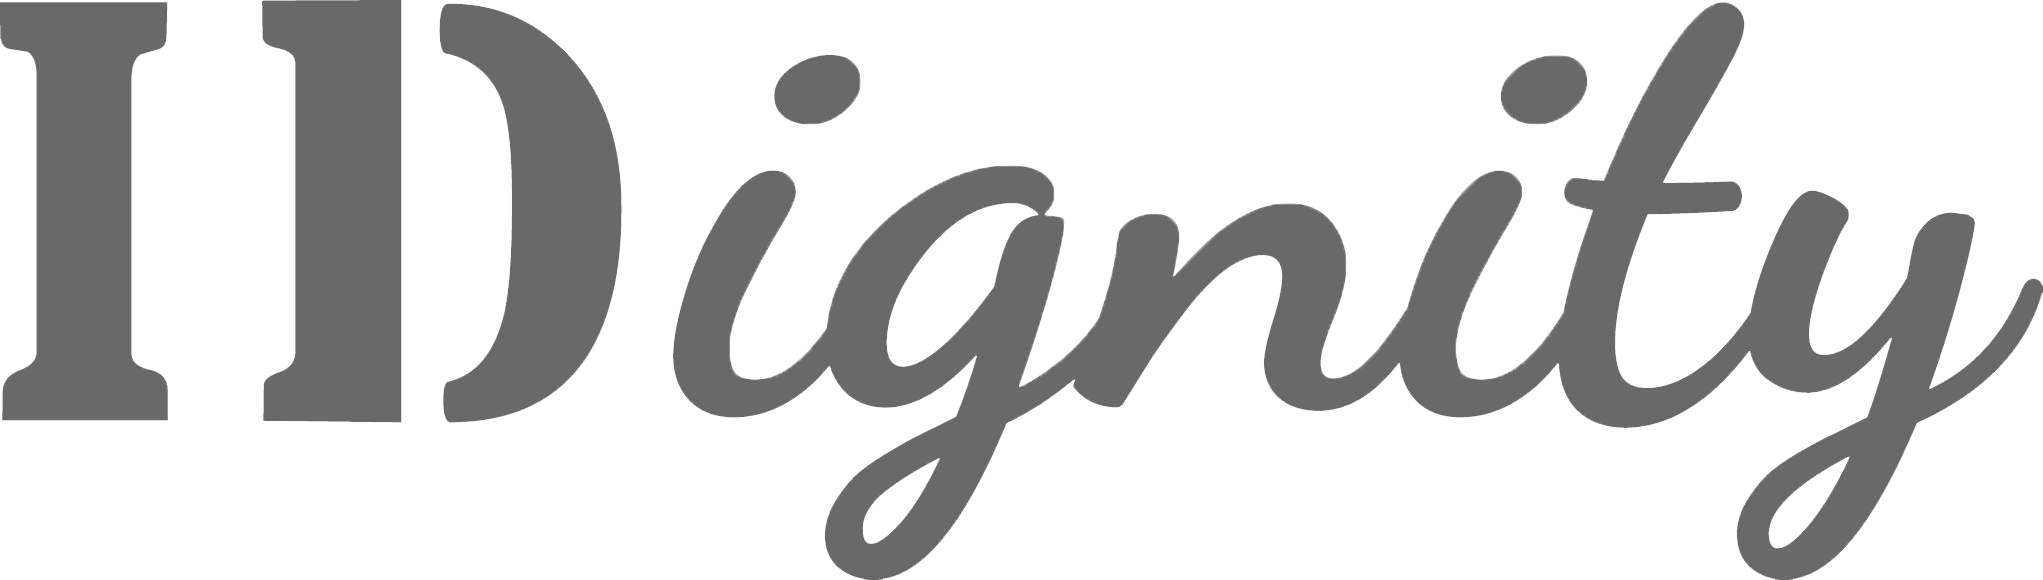 IDignity Magical Dining 2021 Charity logo